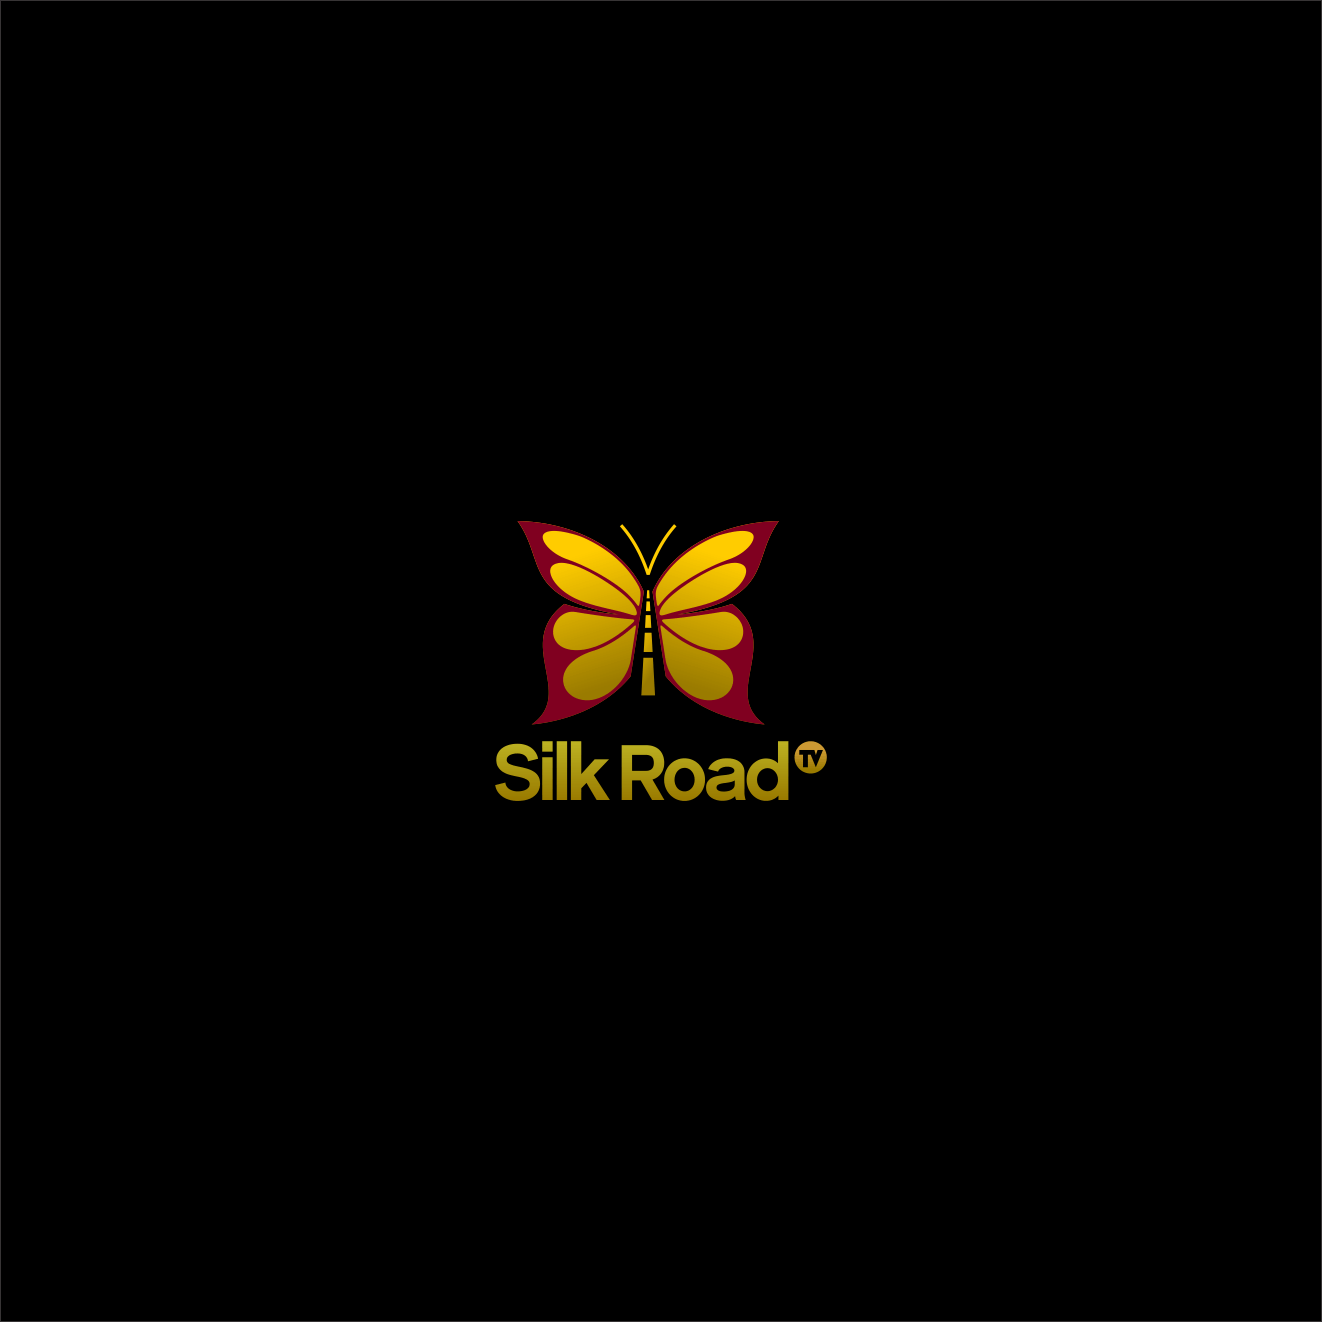 TV Butterfly Logo - Professional, Bold, Television Station Logo Design for Silk Road TV ...